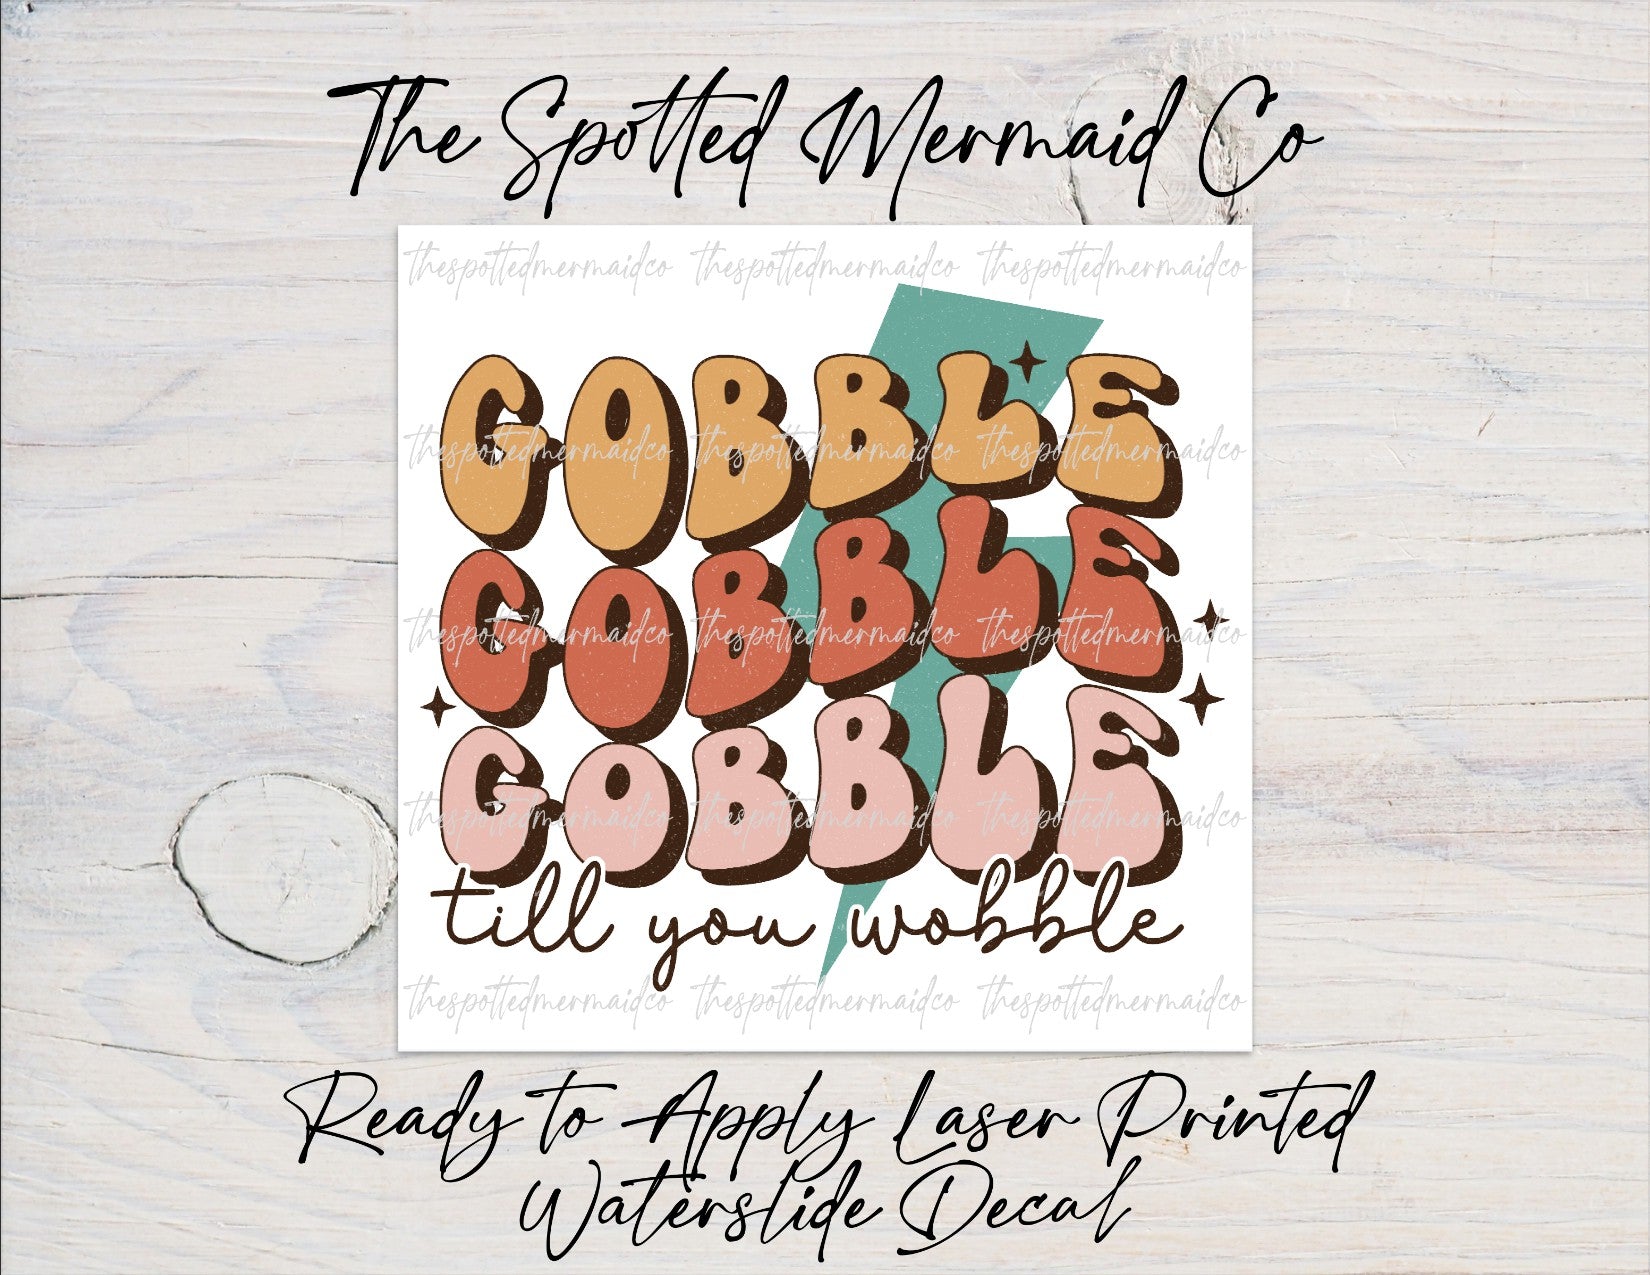 Gobble Till You Wobble Waterslide Decal